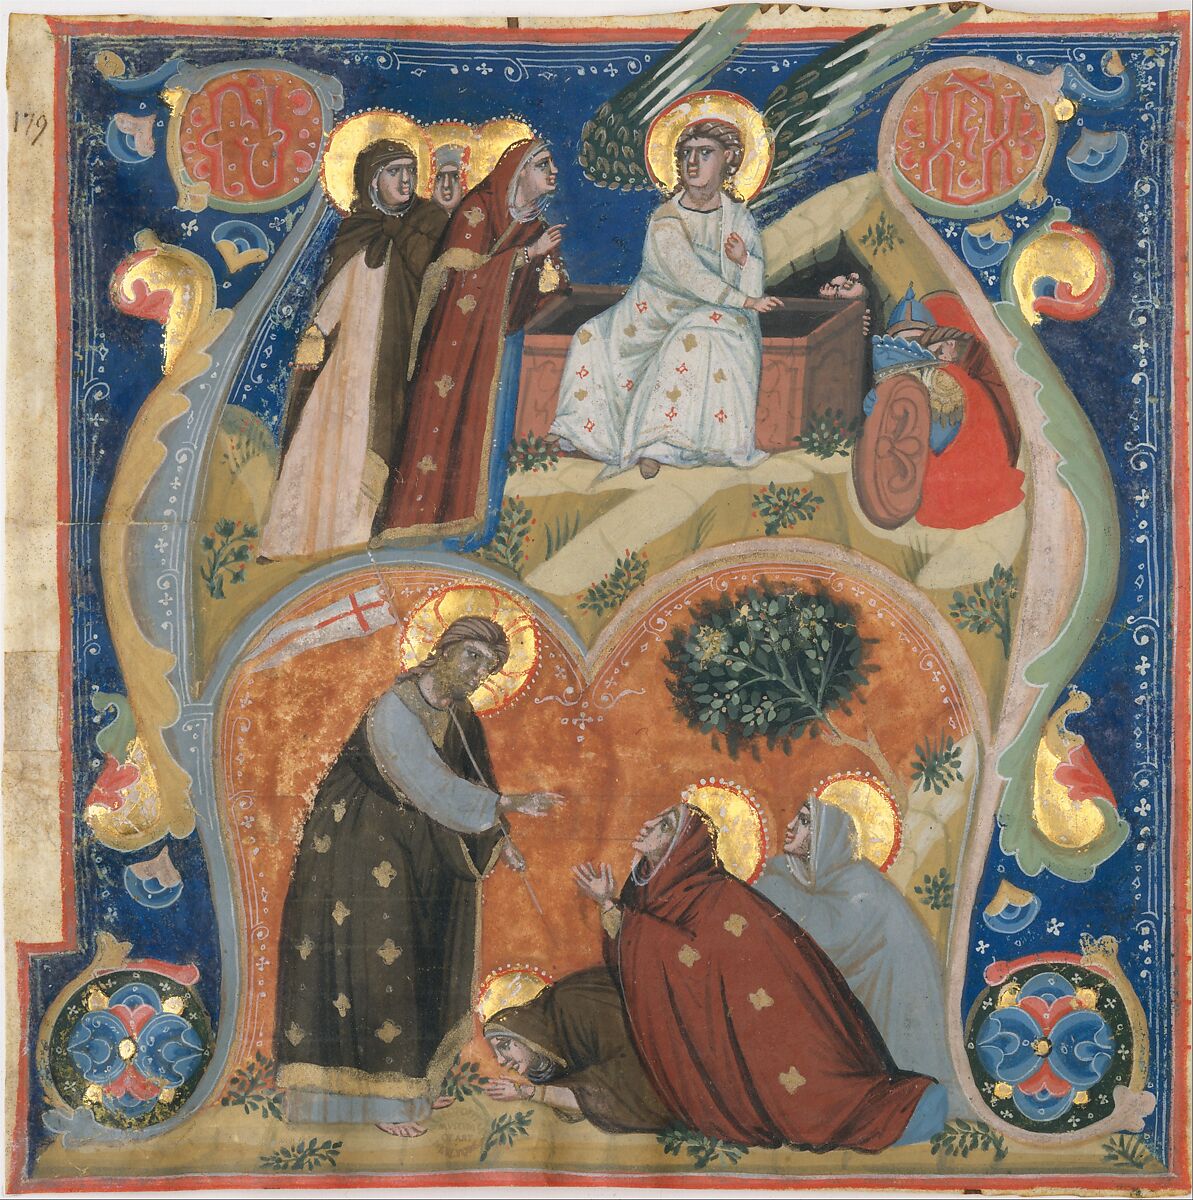 Manuscript Illumination with Scenes of Easter in an Initial A, from an Antiphonary, Nerius (Italian, Bolognese, active 1310–1325), Tempera, ink, and gold on parchment, Italian 